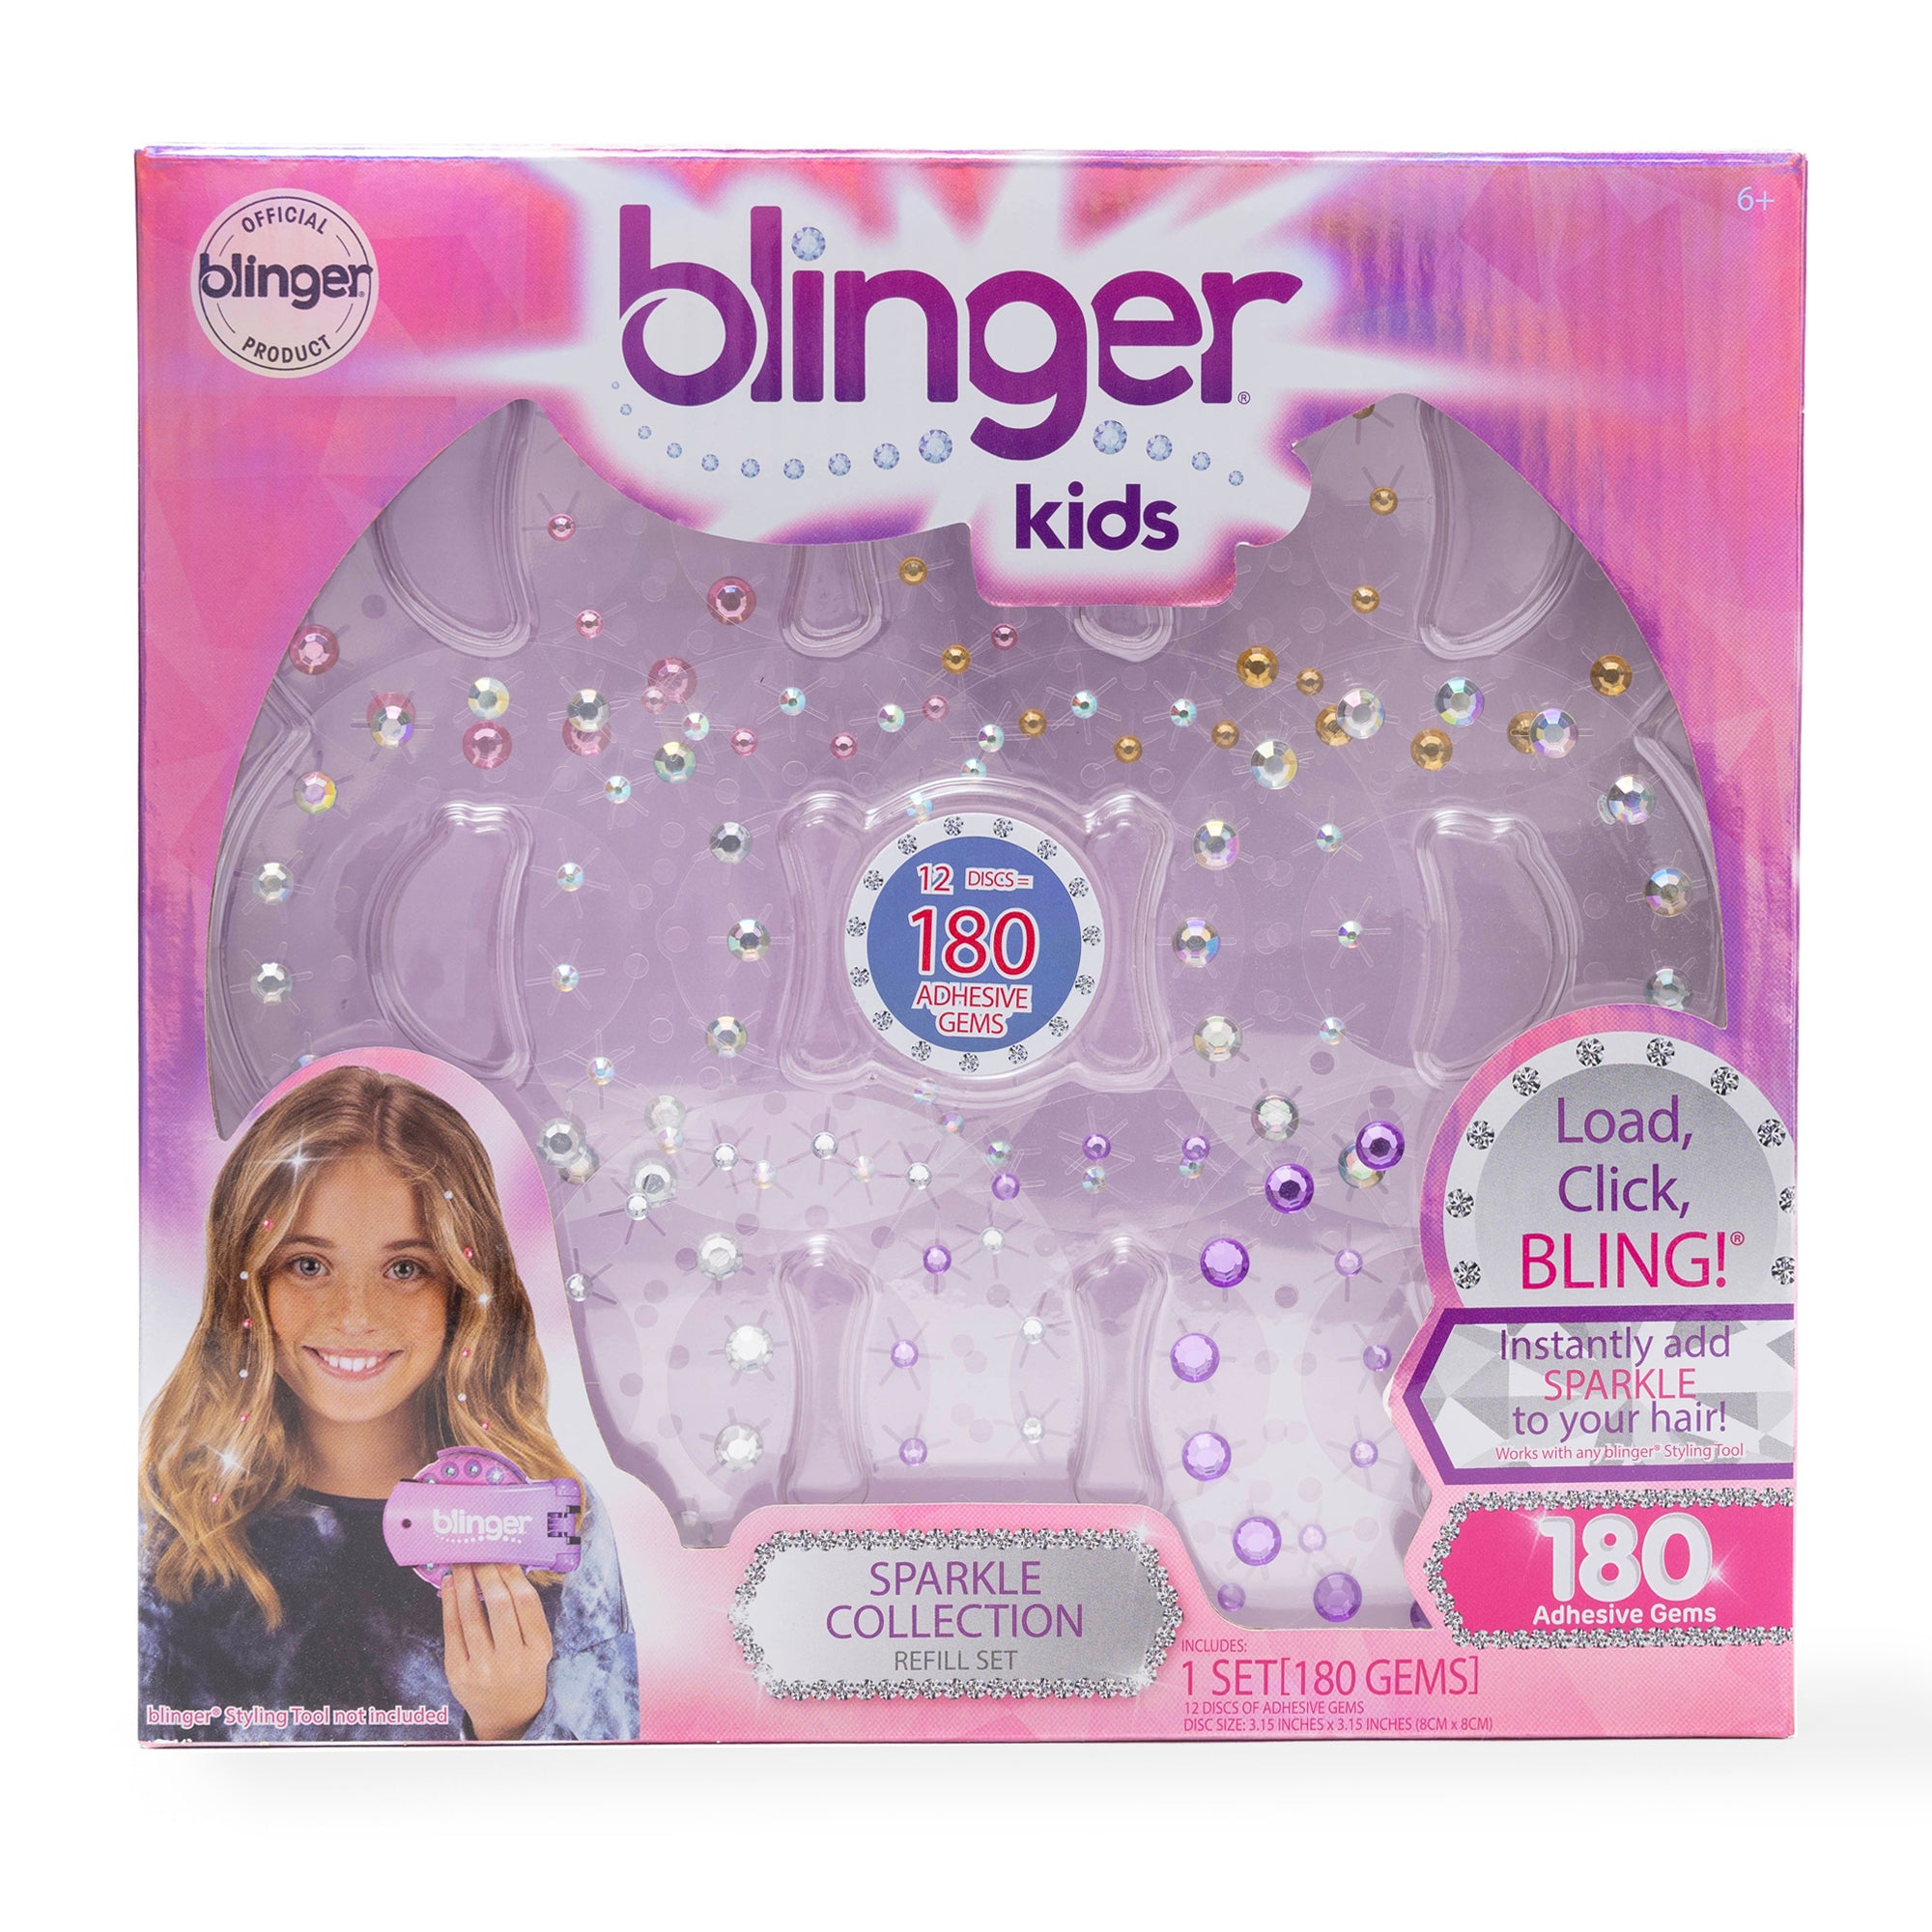 Blinger Glimmer Refill Pack | 5 Discs - 75 Precision-Cut Glass Crystals |  Bedazzling Hair Gems | Hair-Safe Adhesive â€“ Bling In Brush Out | Works